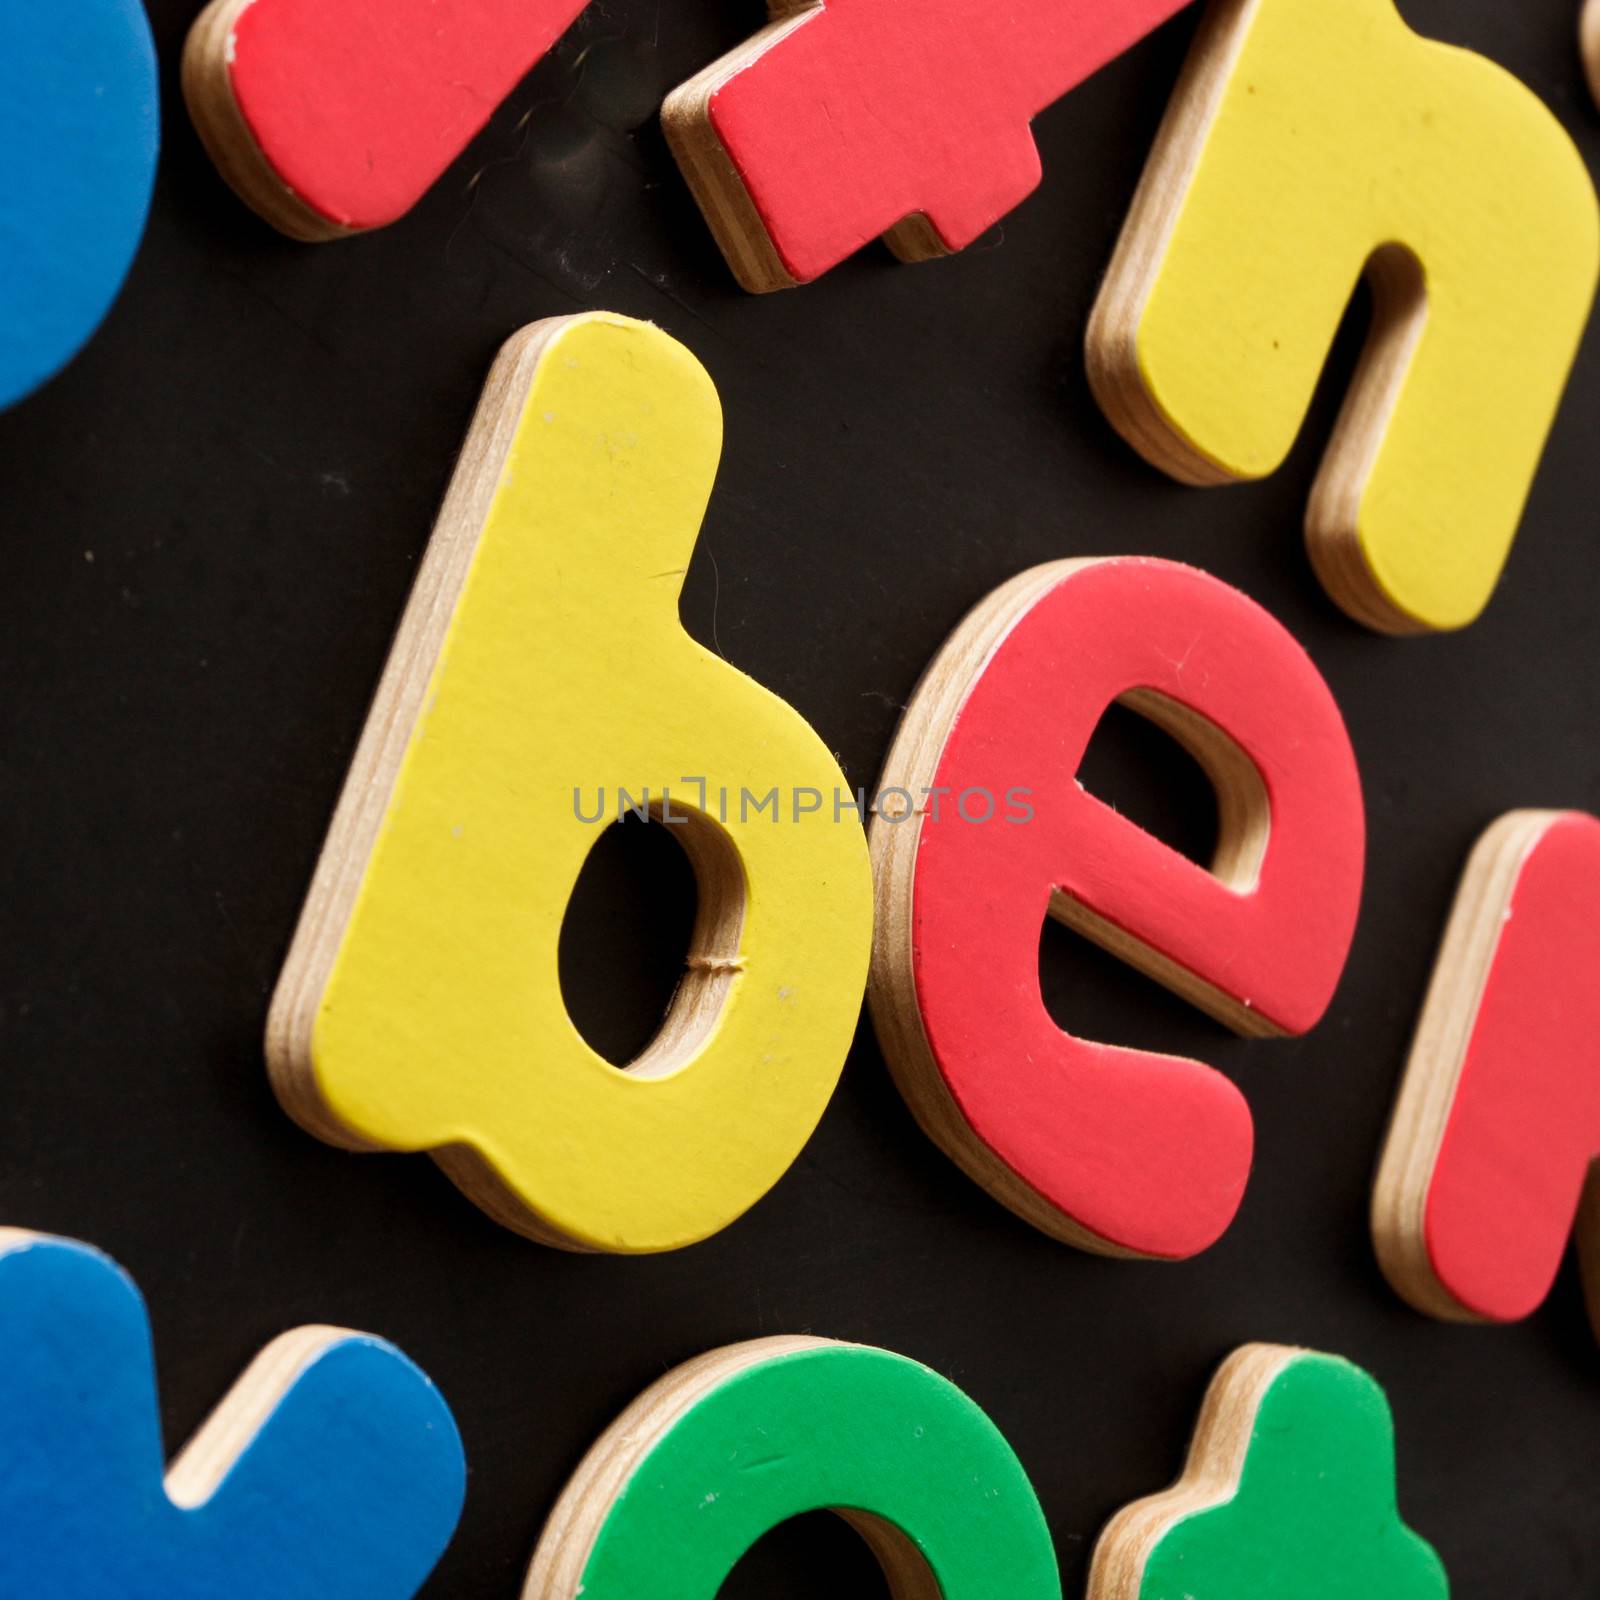 Be written in colorful magnetic toy letters